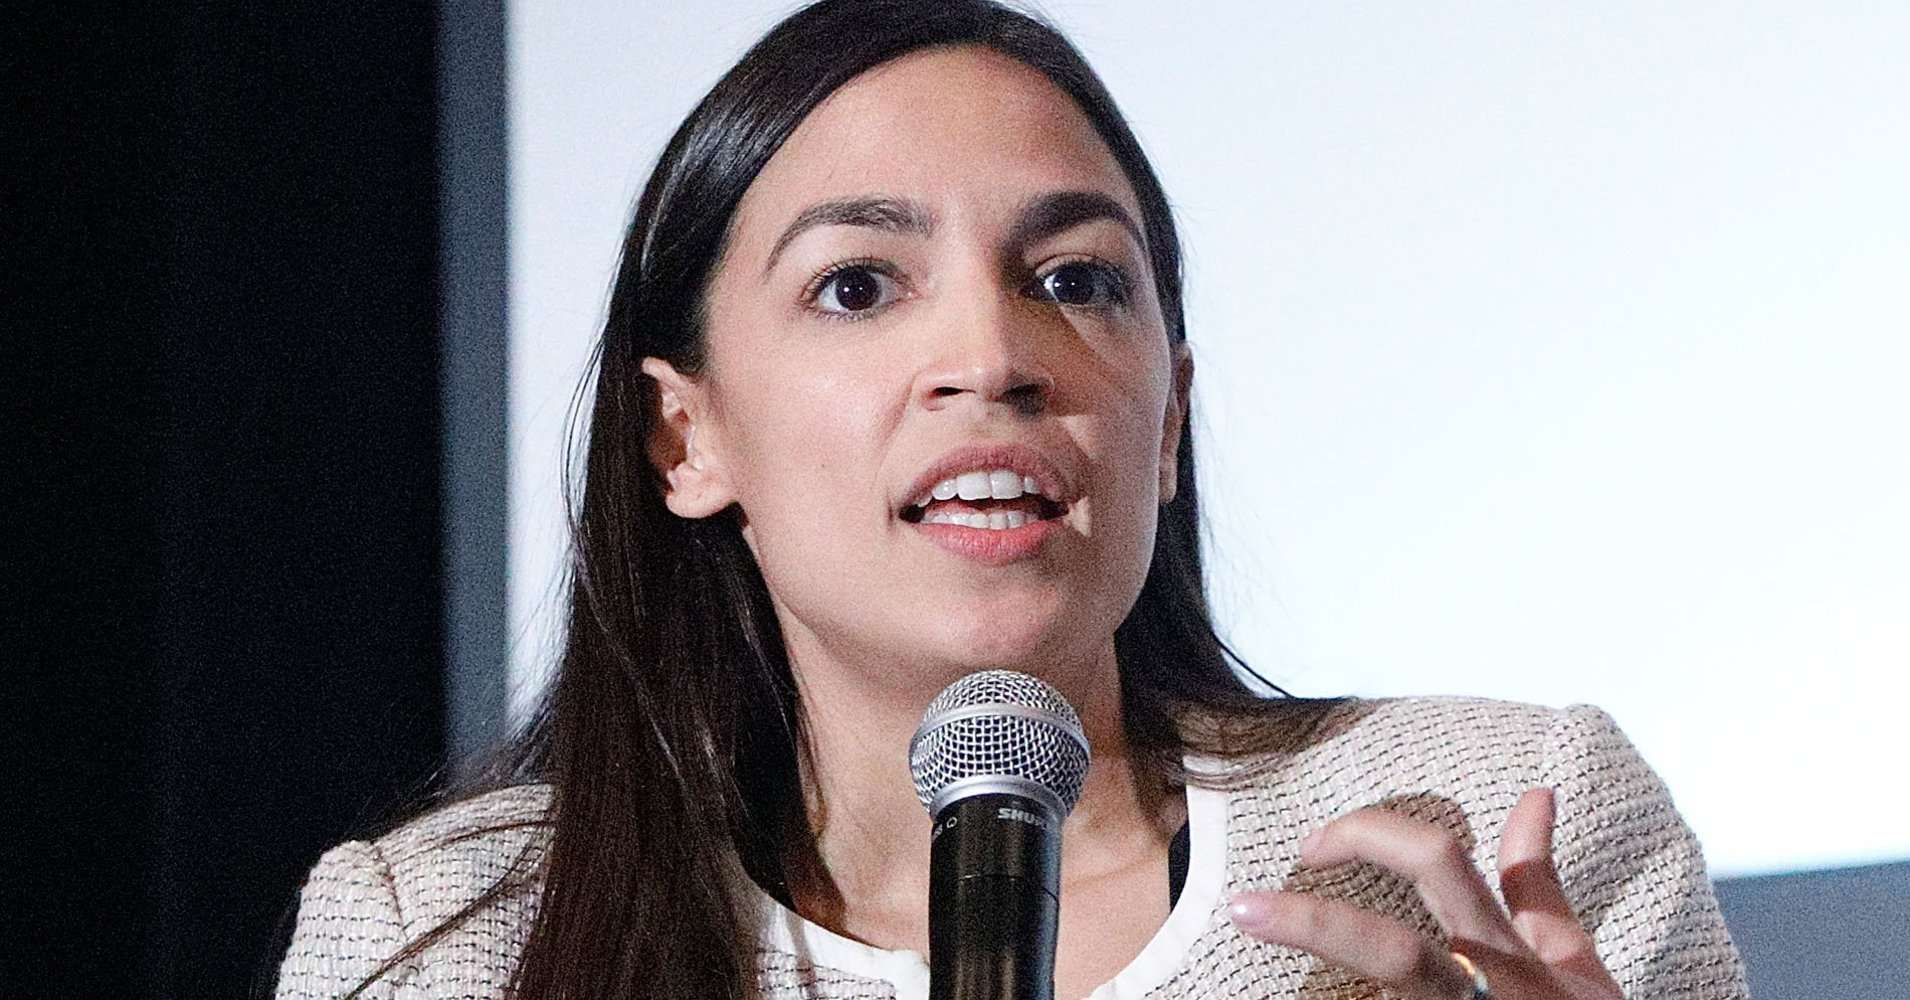 image for Alexandria Ocasio-Cortez Blames Right-Wing Media For Daily Death Threats